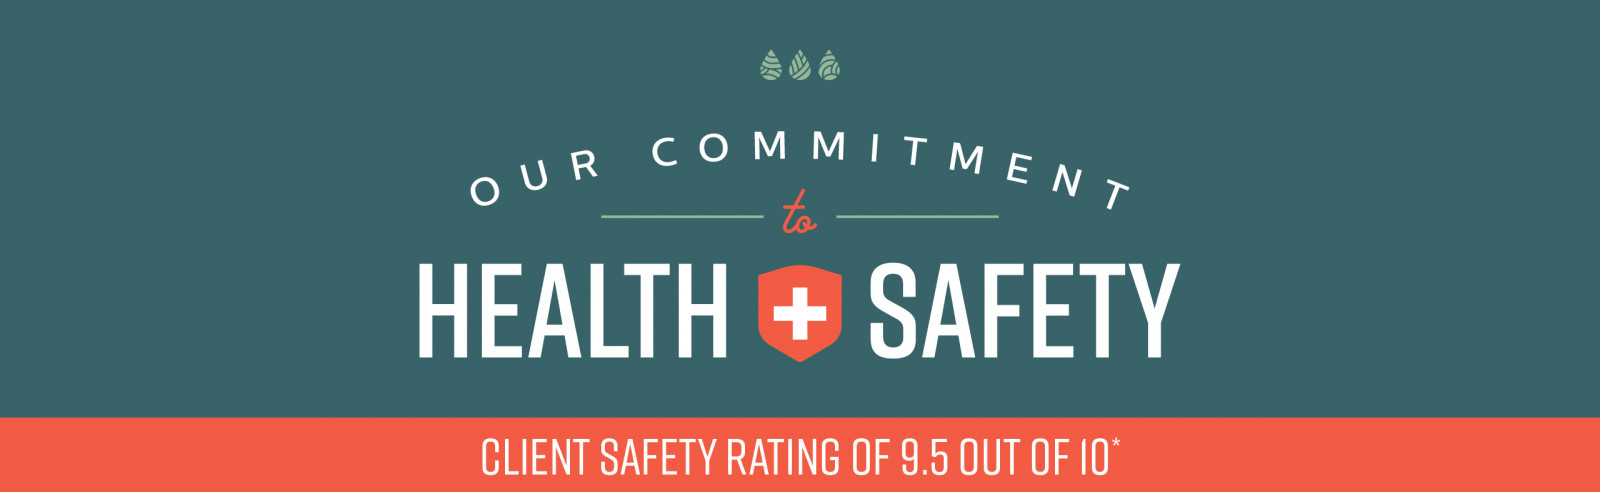 our commitment to health and safety